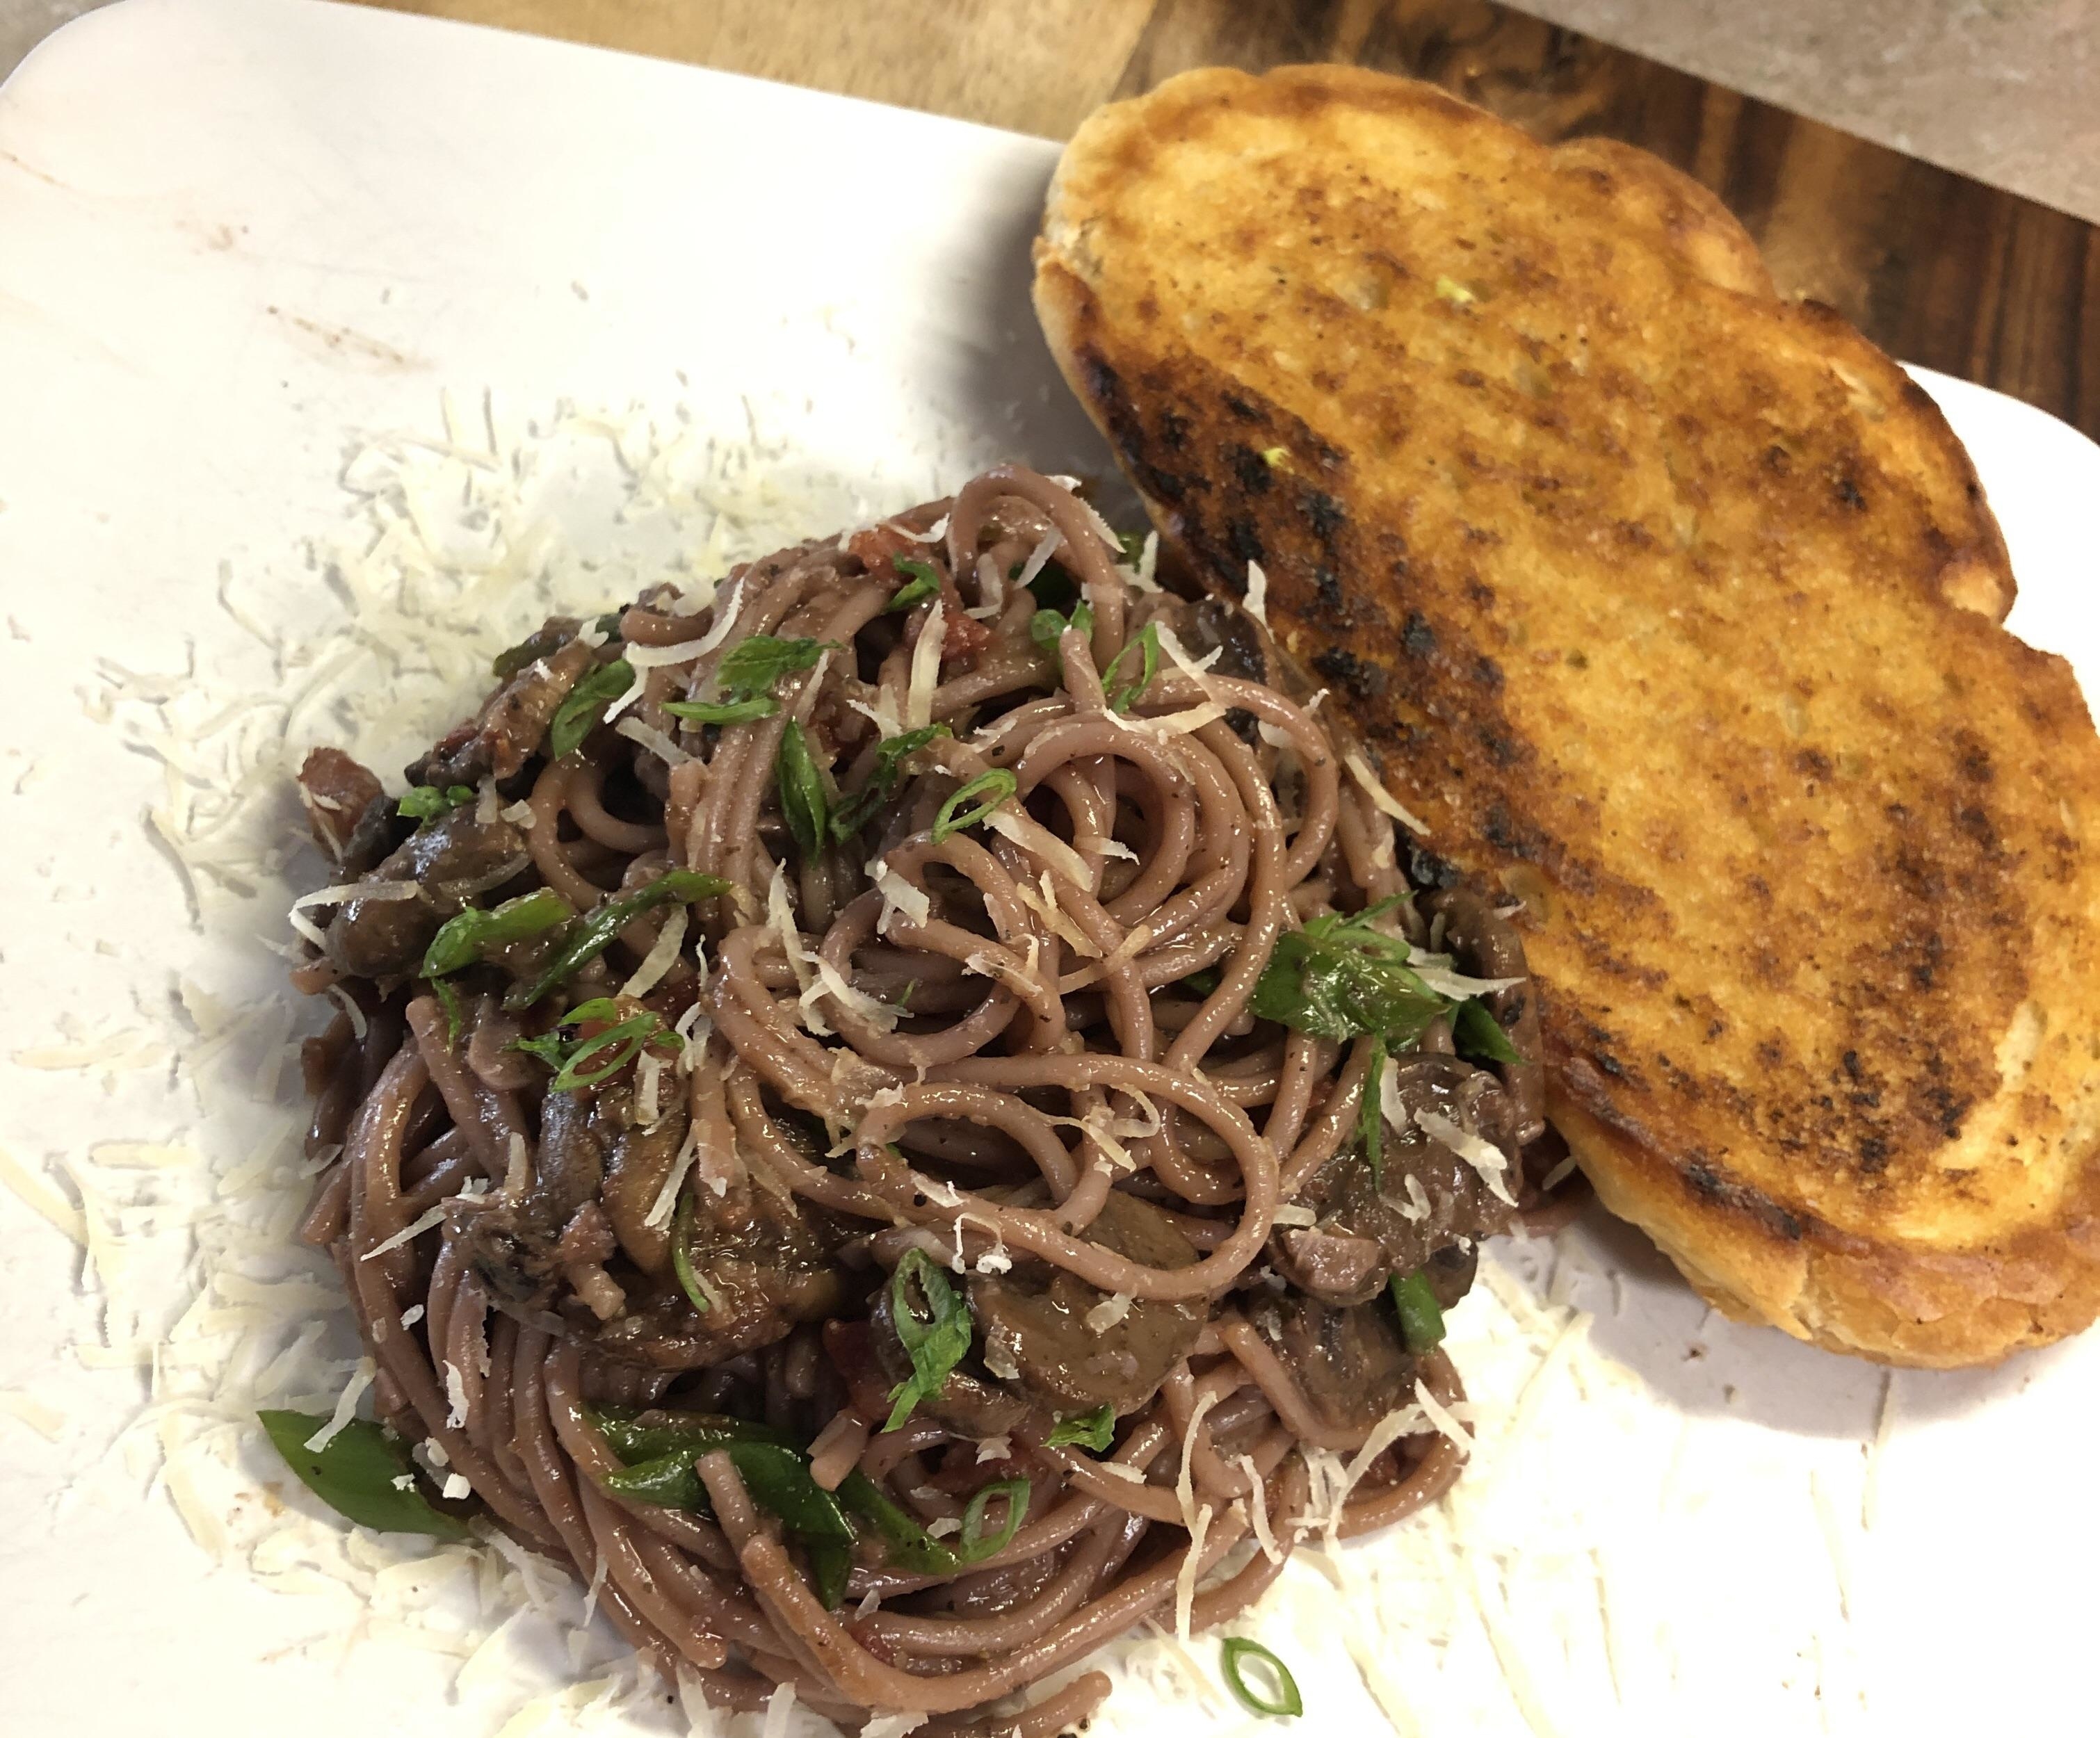 Plate of spaghetti cooked in red wine with herbs and a slice of garlic bread on the side